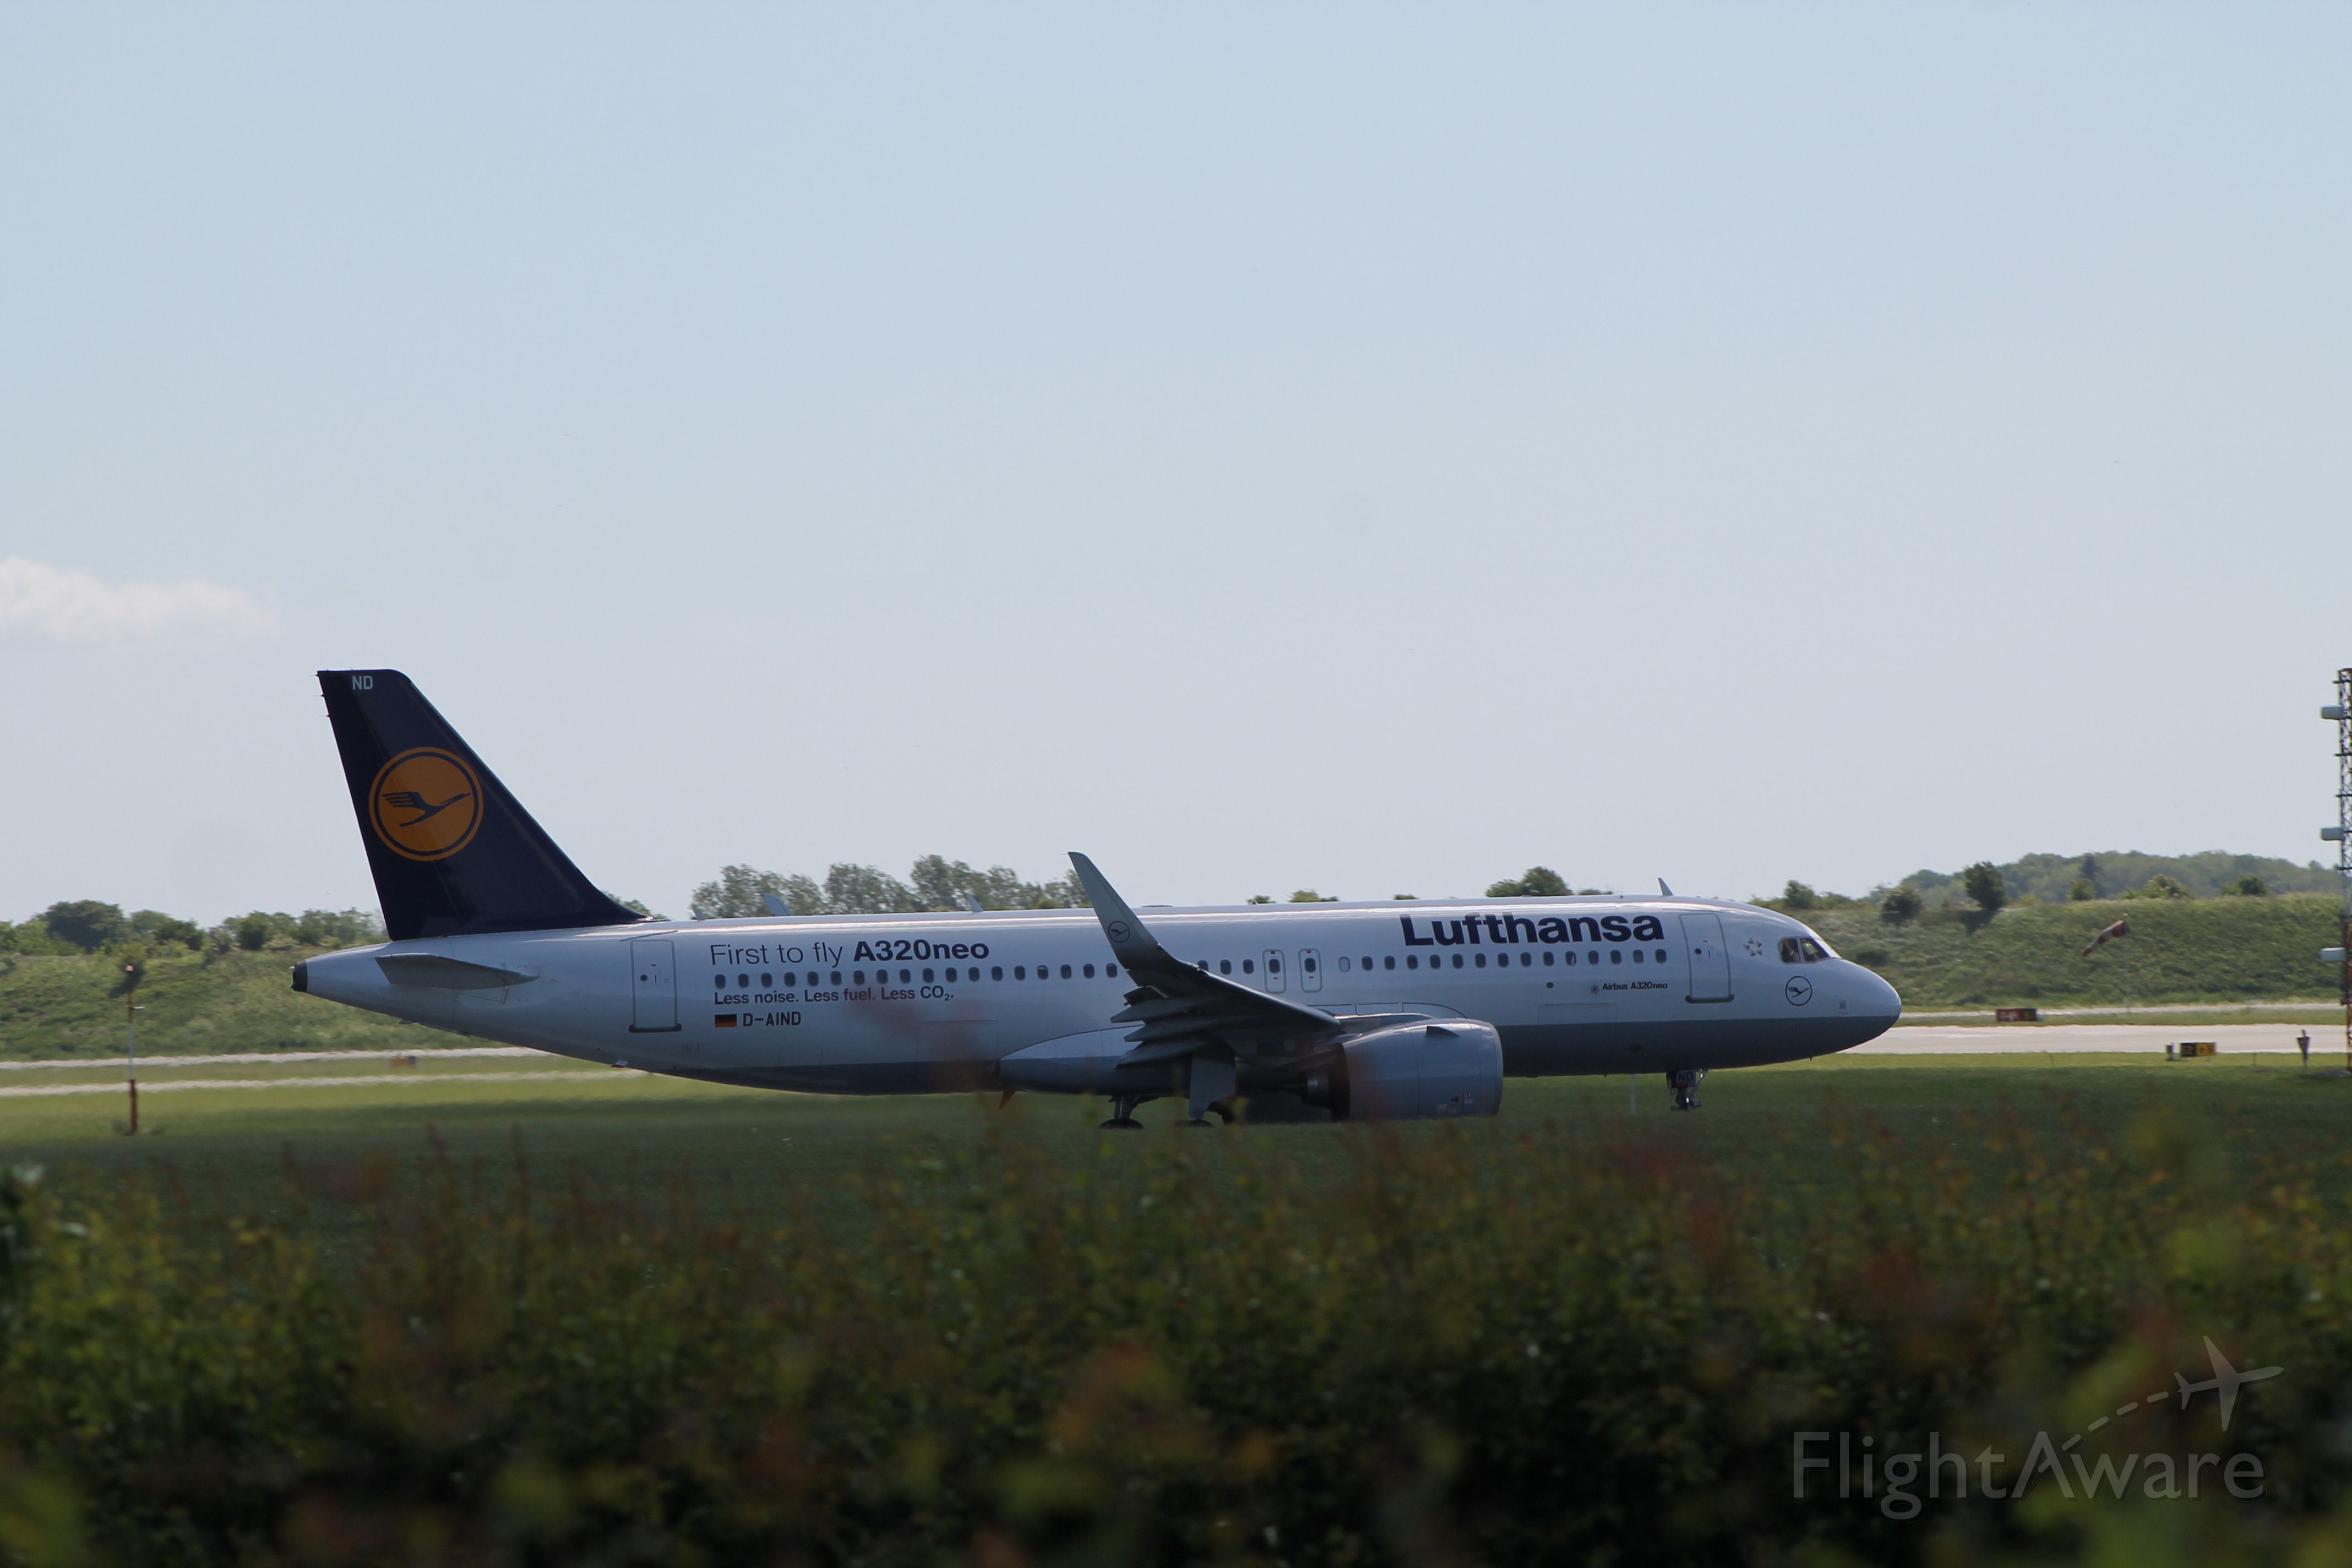 Airbus A320 (D-AIND) - did some spotting at Flyvergrillen located on the airport perimeter while getting a bite to eat